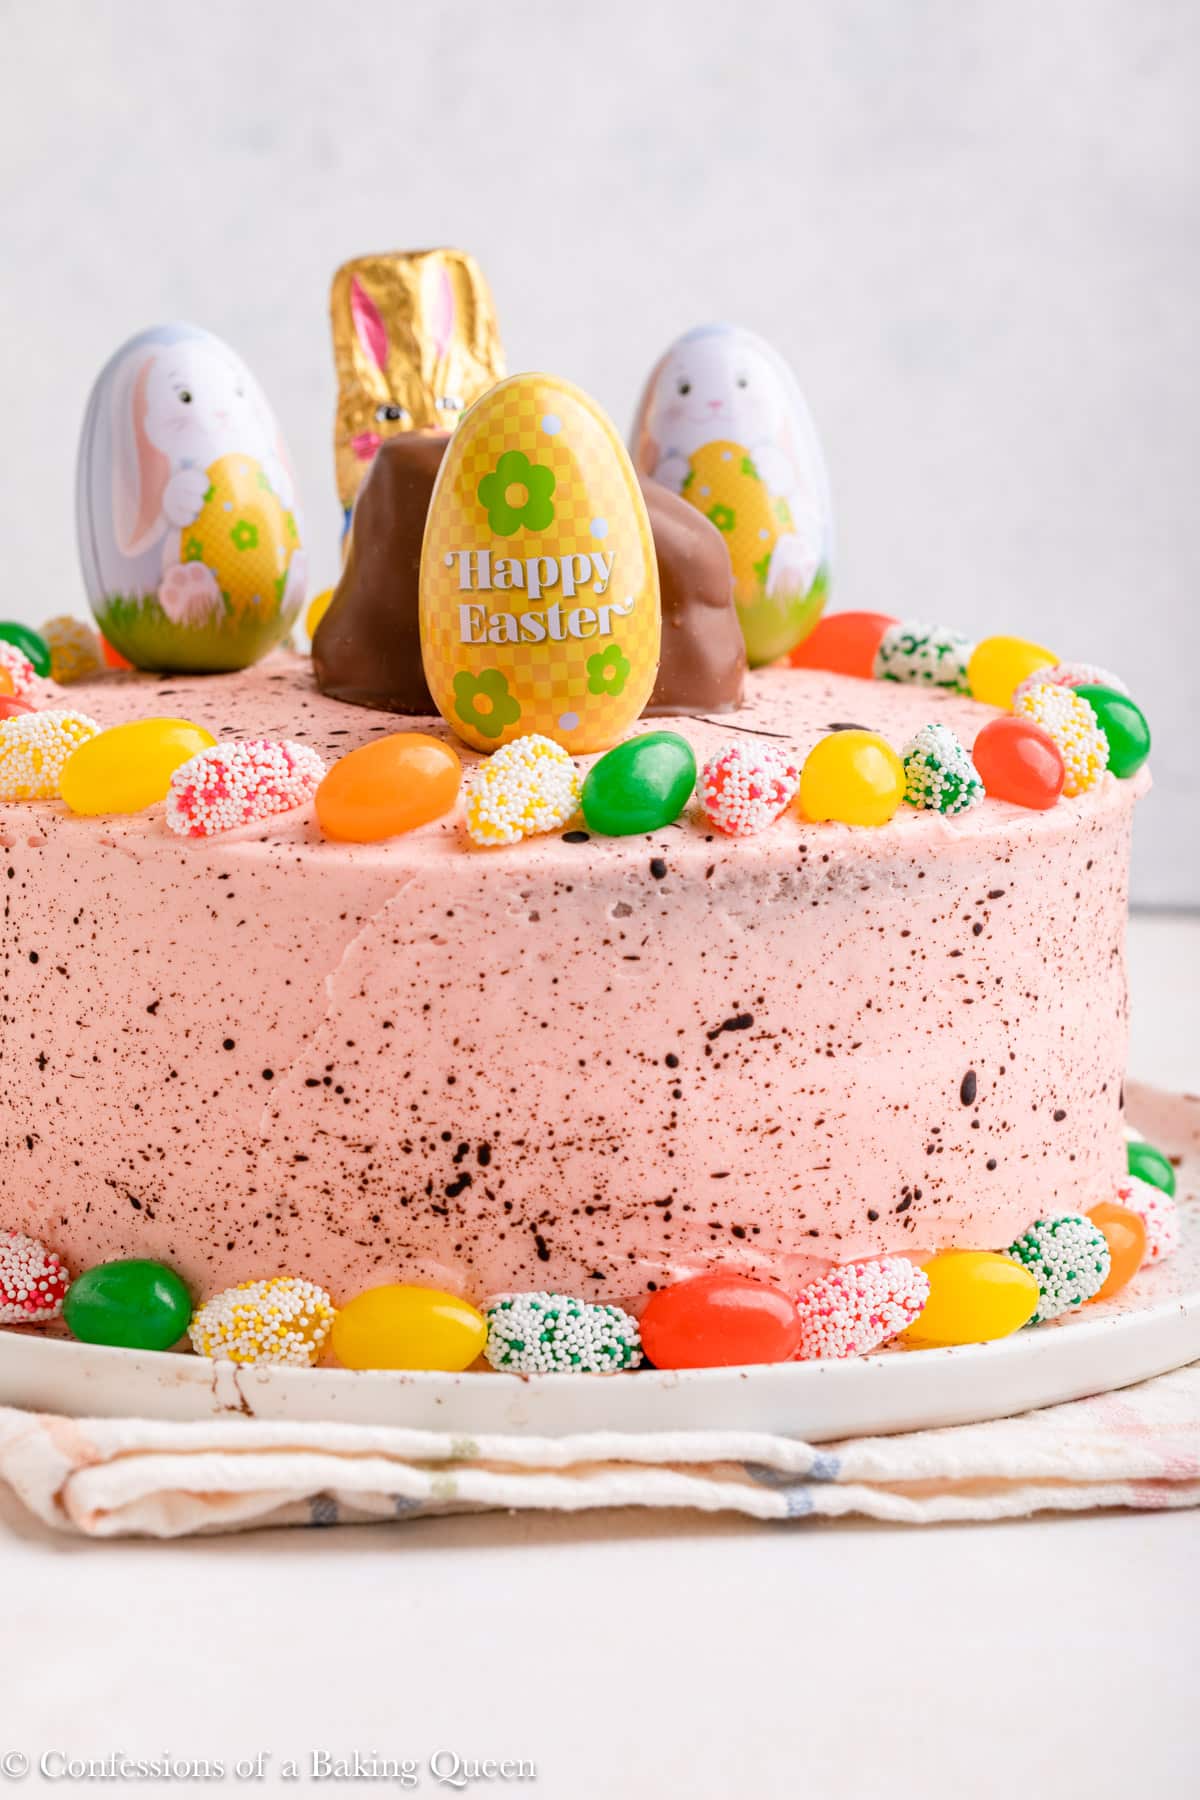 easter cake decorated with sees candies on a white plate on top of a checkered linen on a light surface